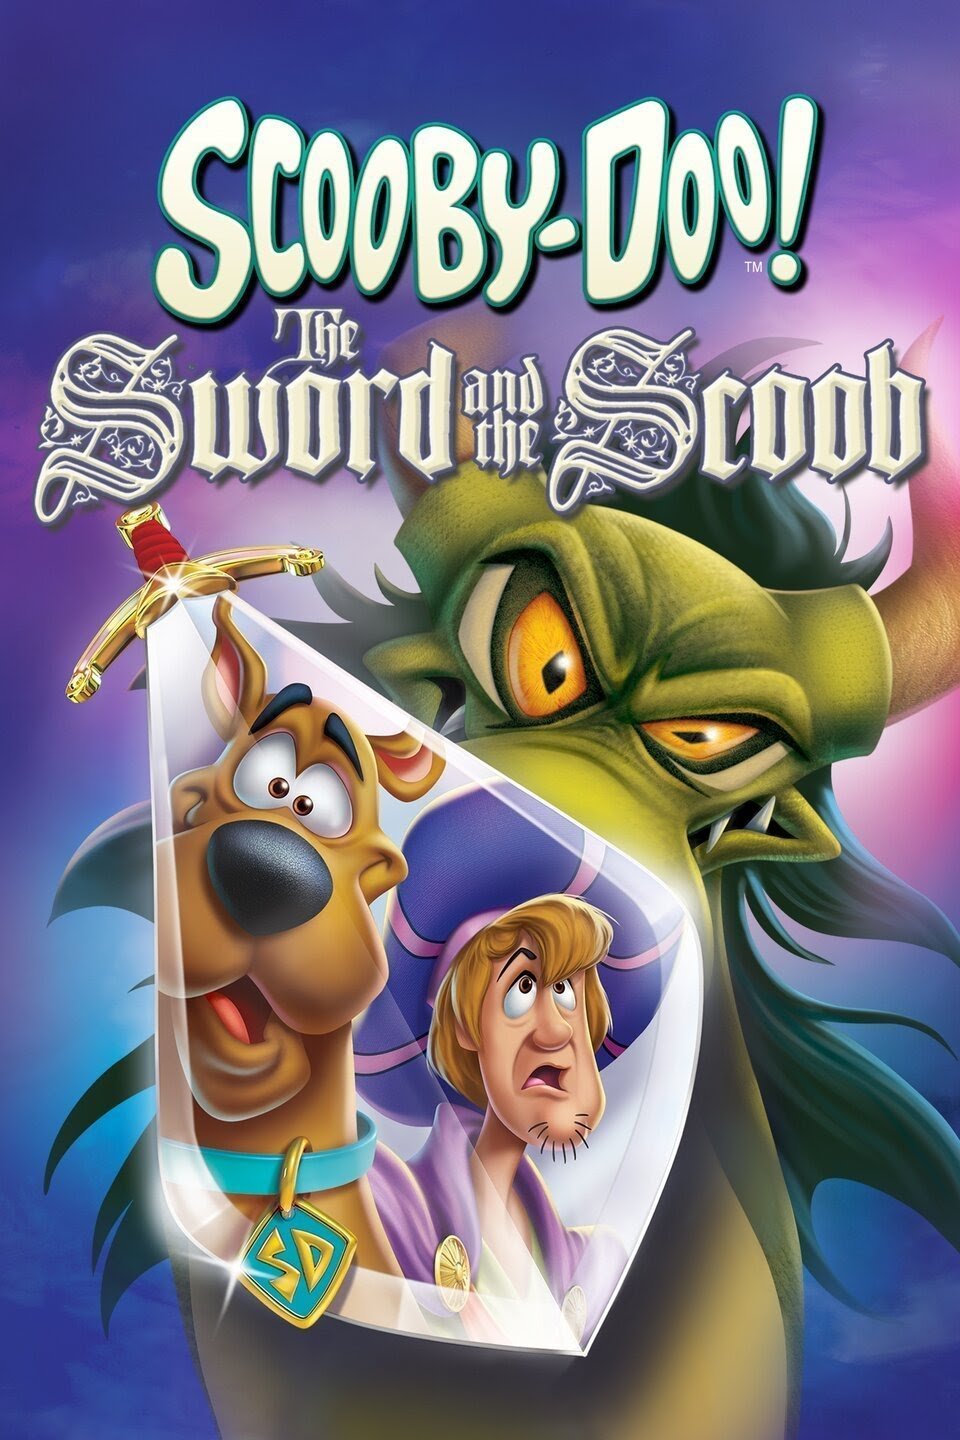 Poster of the movie Scooby-Doo! The Sword and the Scoob